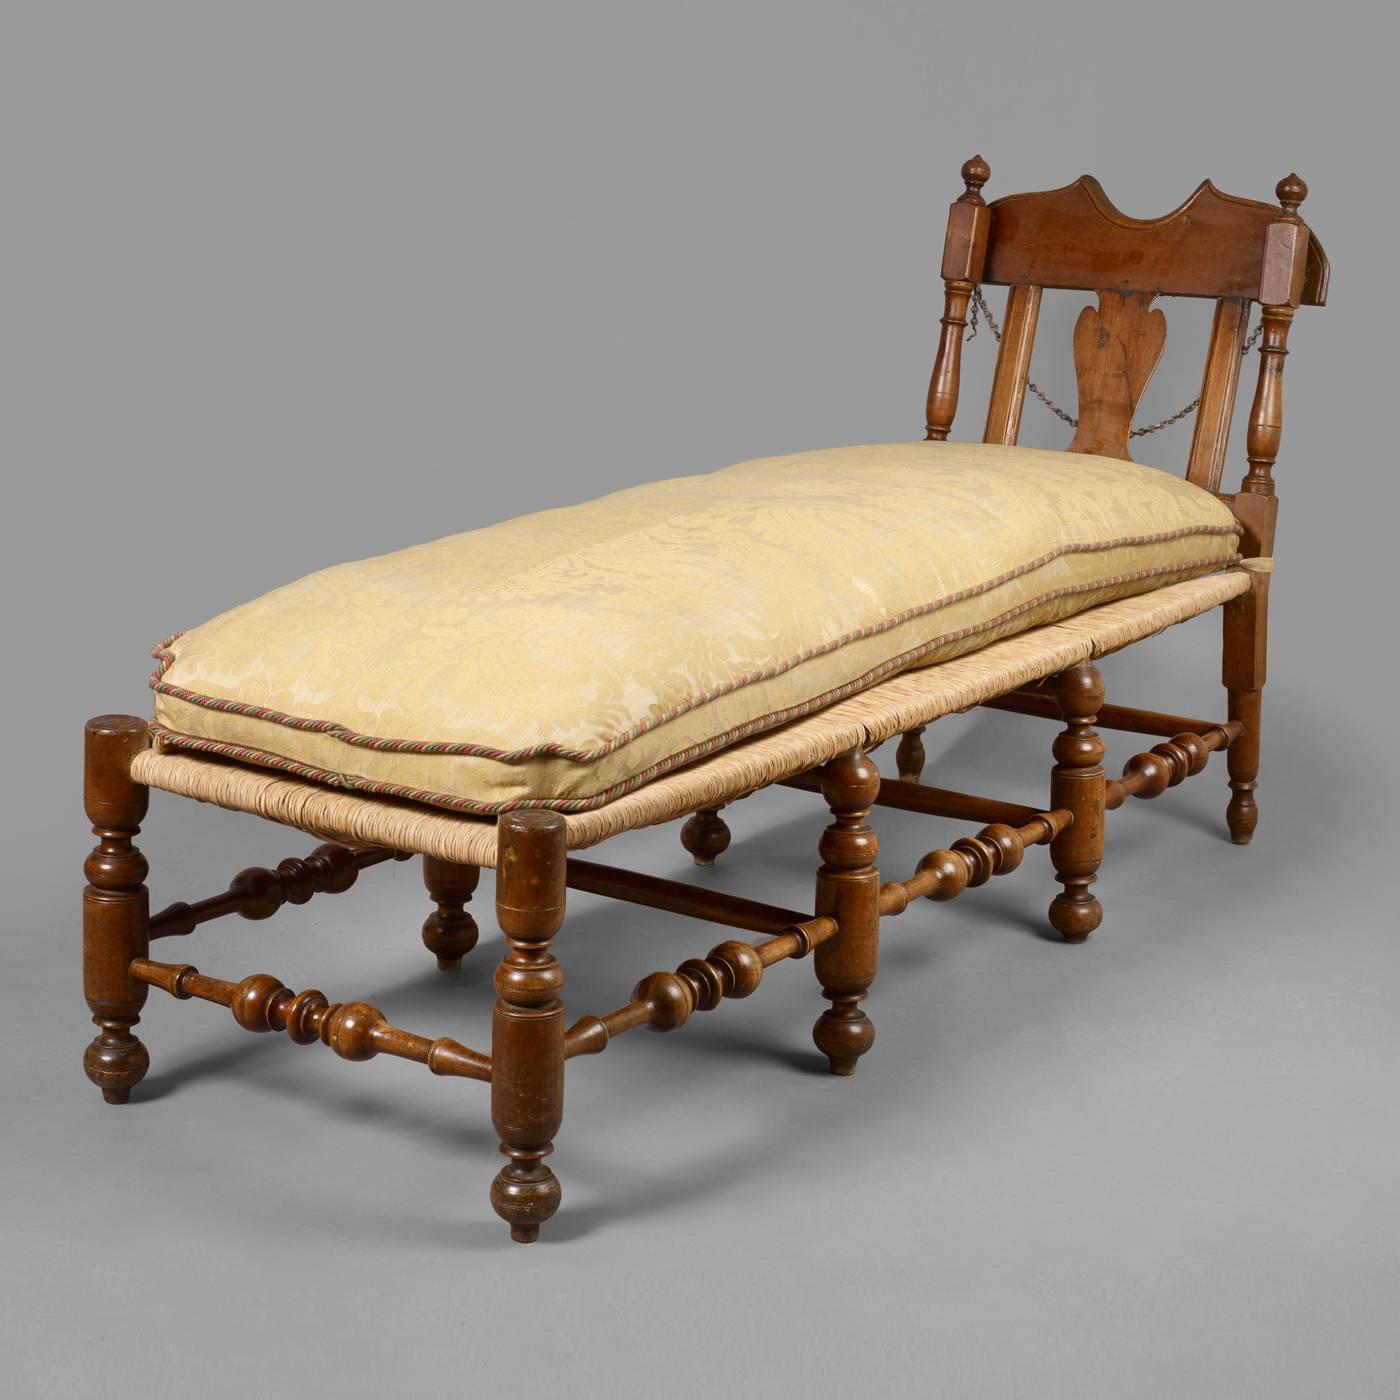 Pennsylvania, circa 1740-1750.
Maple, rush seat.
Condition: Excellent condition, retaining all the original feet. Re-rushed.
This rare example of a Queen Anne daybed is complete having a reclining back with a yoke crest above a vasiform splat.